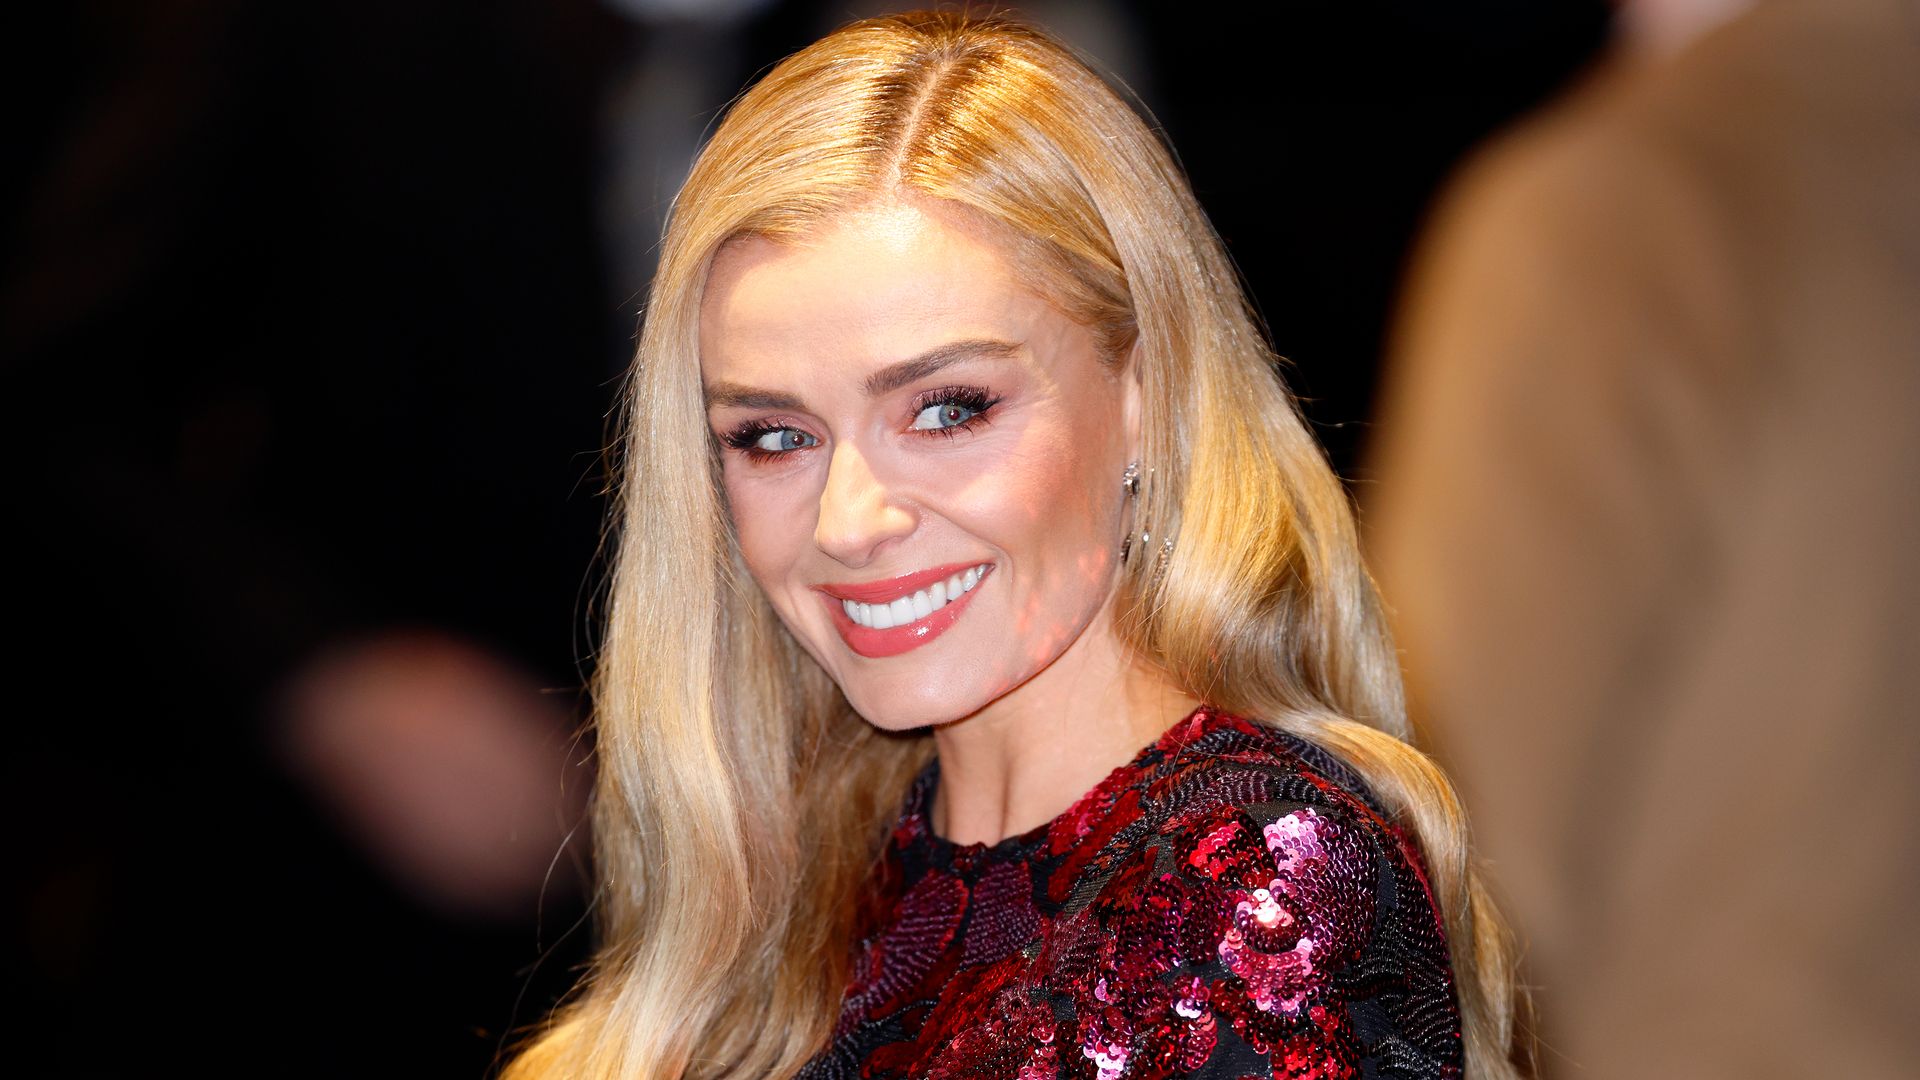 Katherine Jenkins' stunning London home is fit for royalty